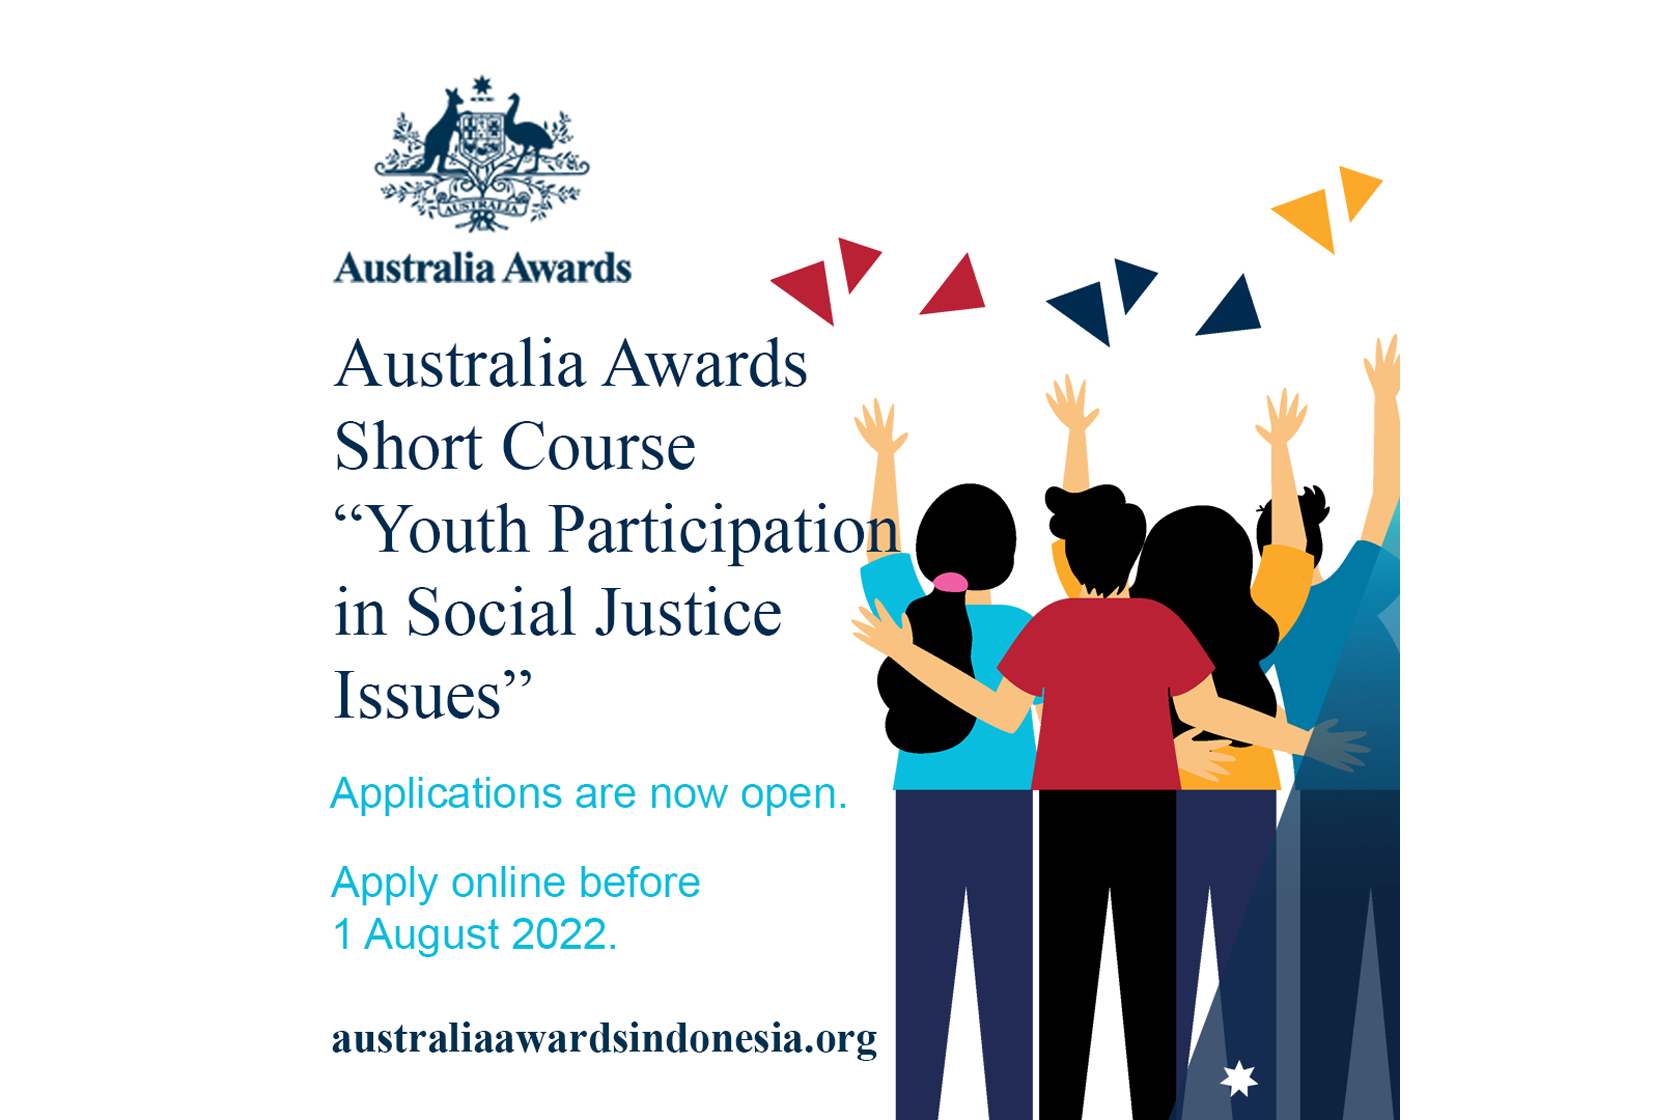 Applications Open for the Australia Awards Short Course on Youth Participation in Social Justice Issues